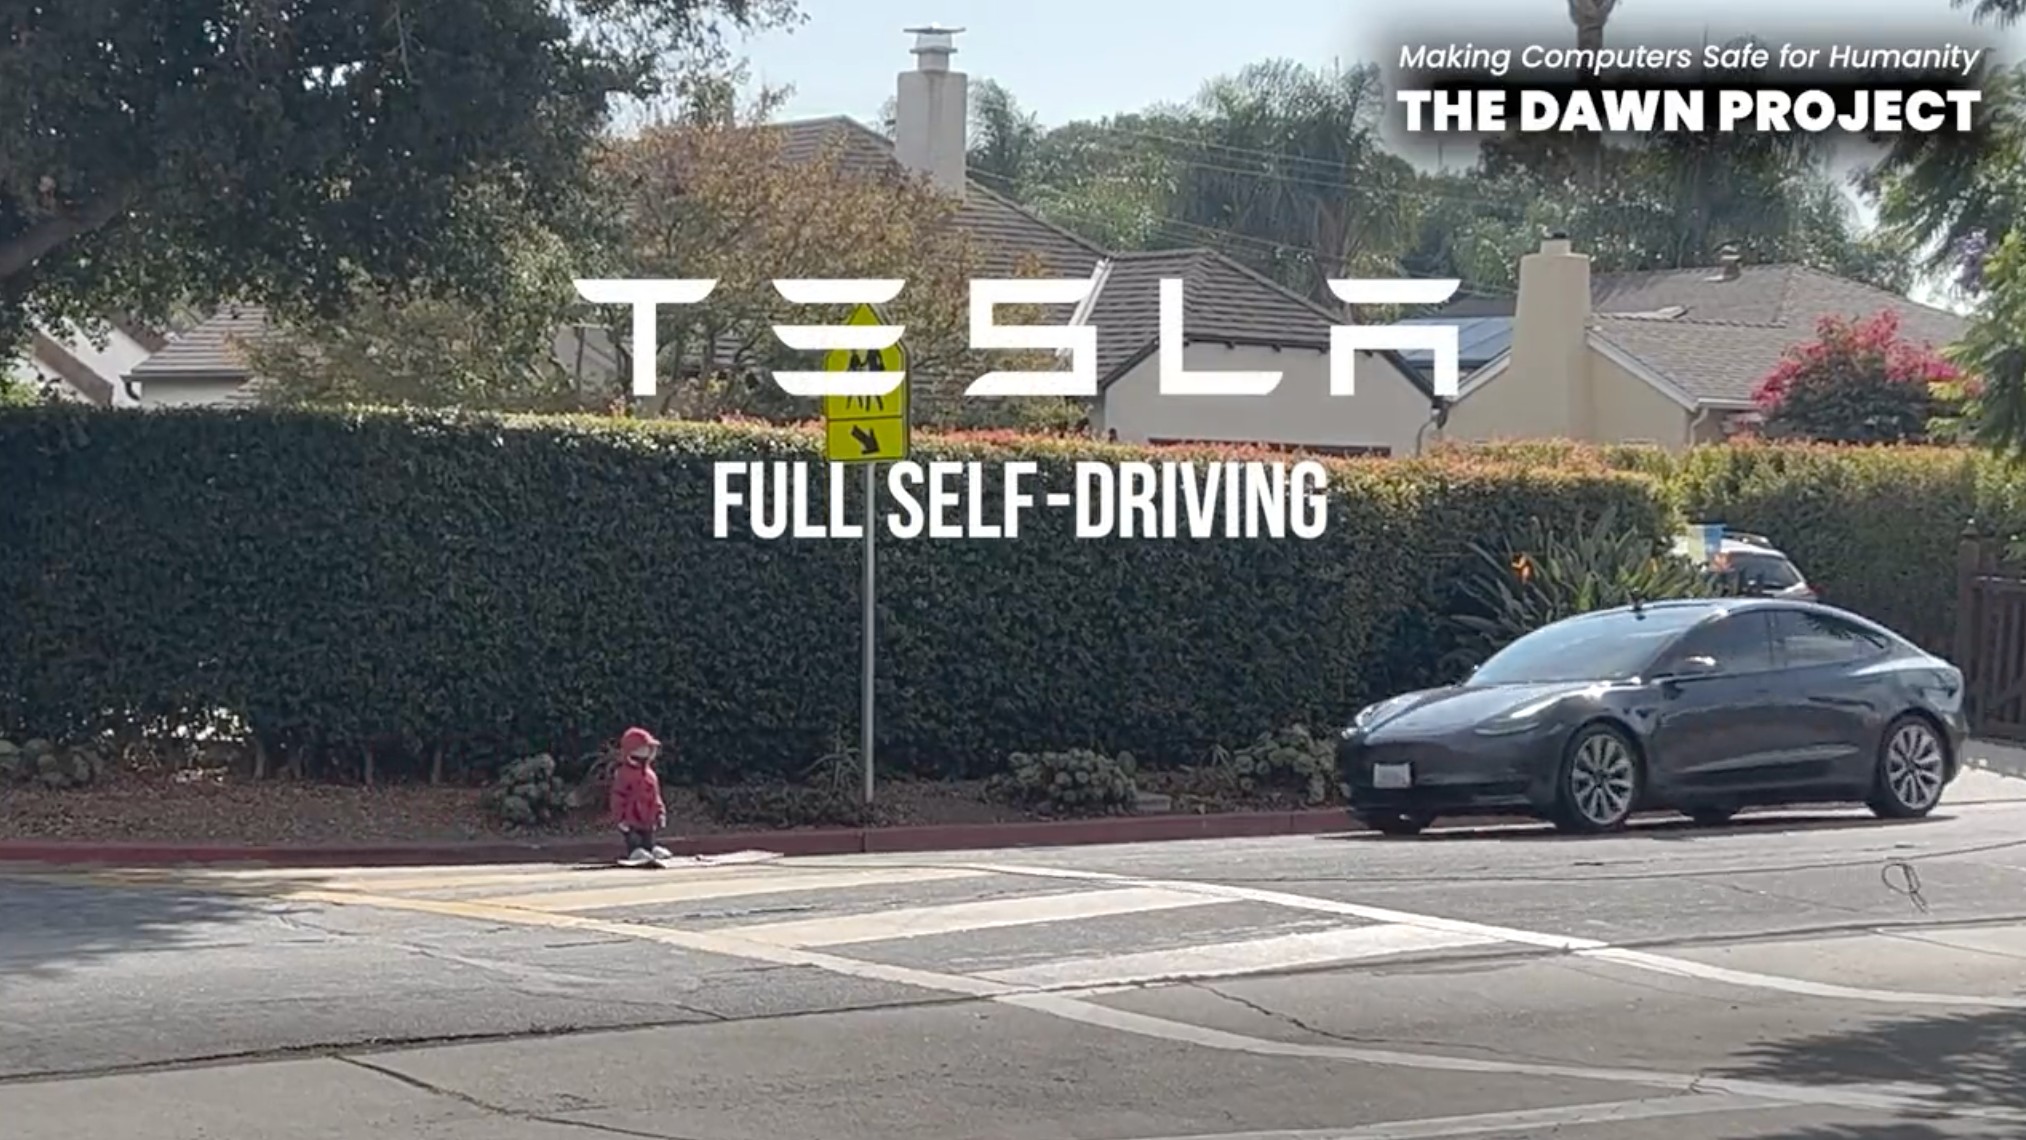 Tesla Full Self-Driving Super Bowl ad aims criticism at driver assistance suite